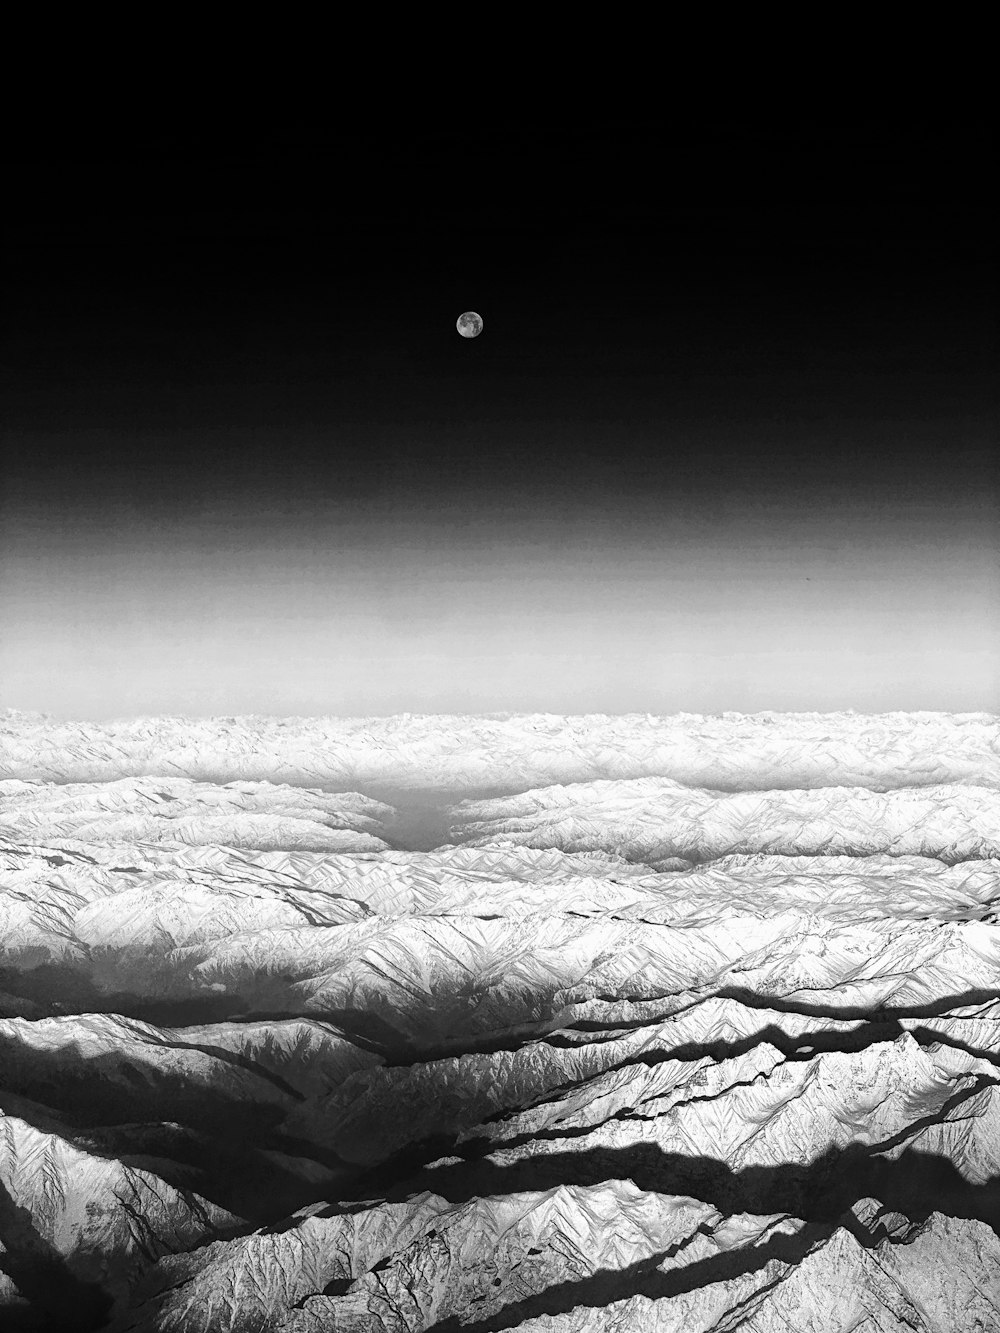 a black and white photo of mountains and a moon